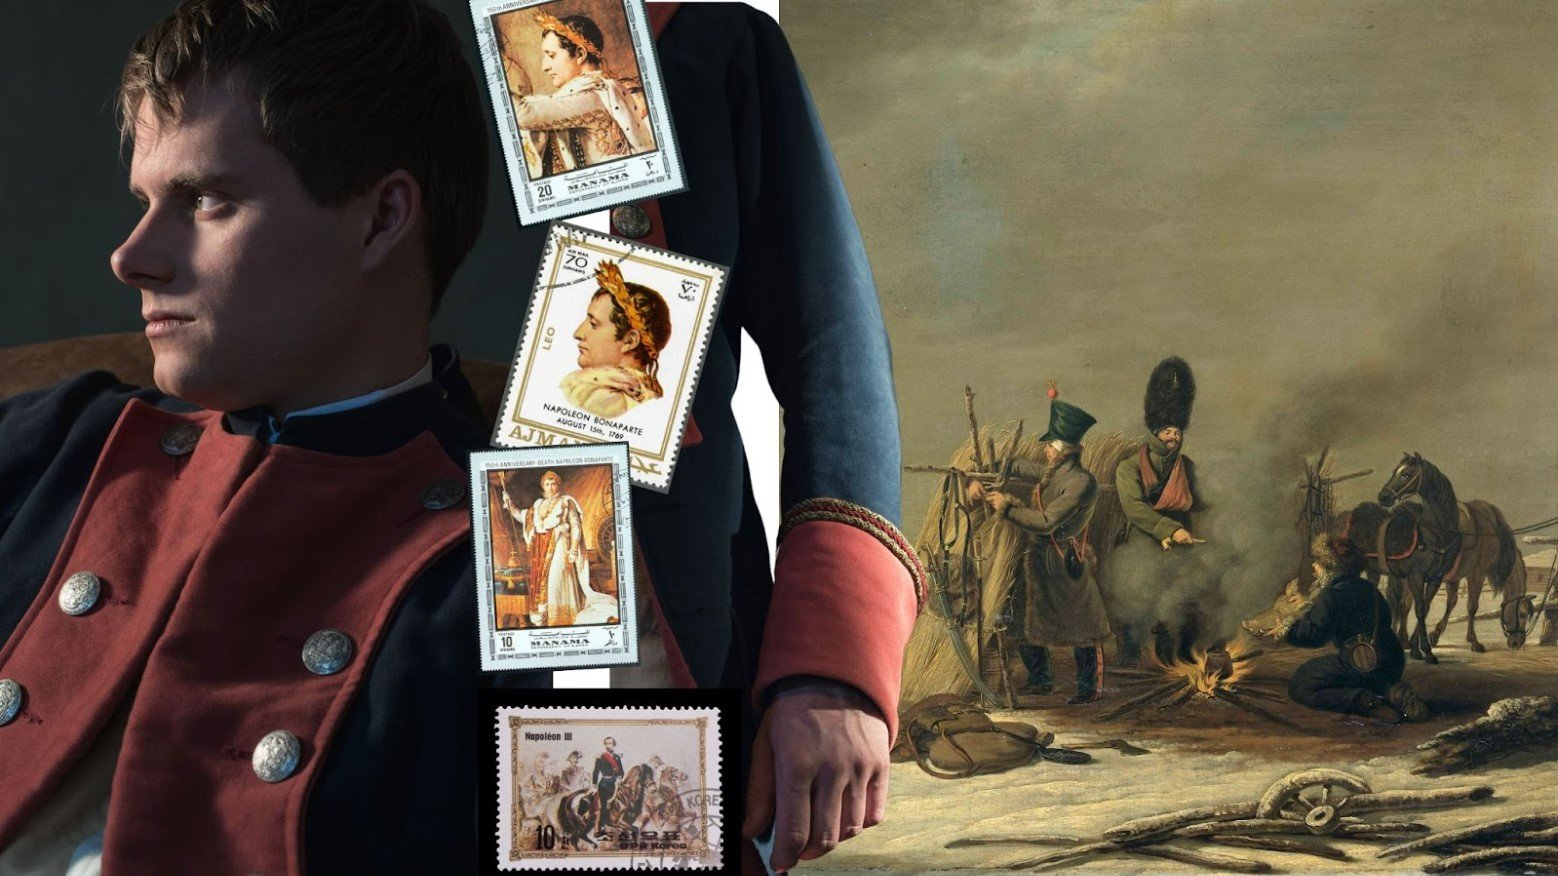 A montage of Napoleon is shown, as well as related stamp imagery and a side shot of his famed general’s coat.